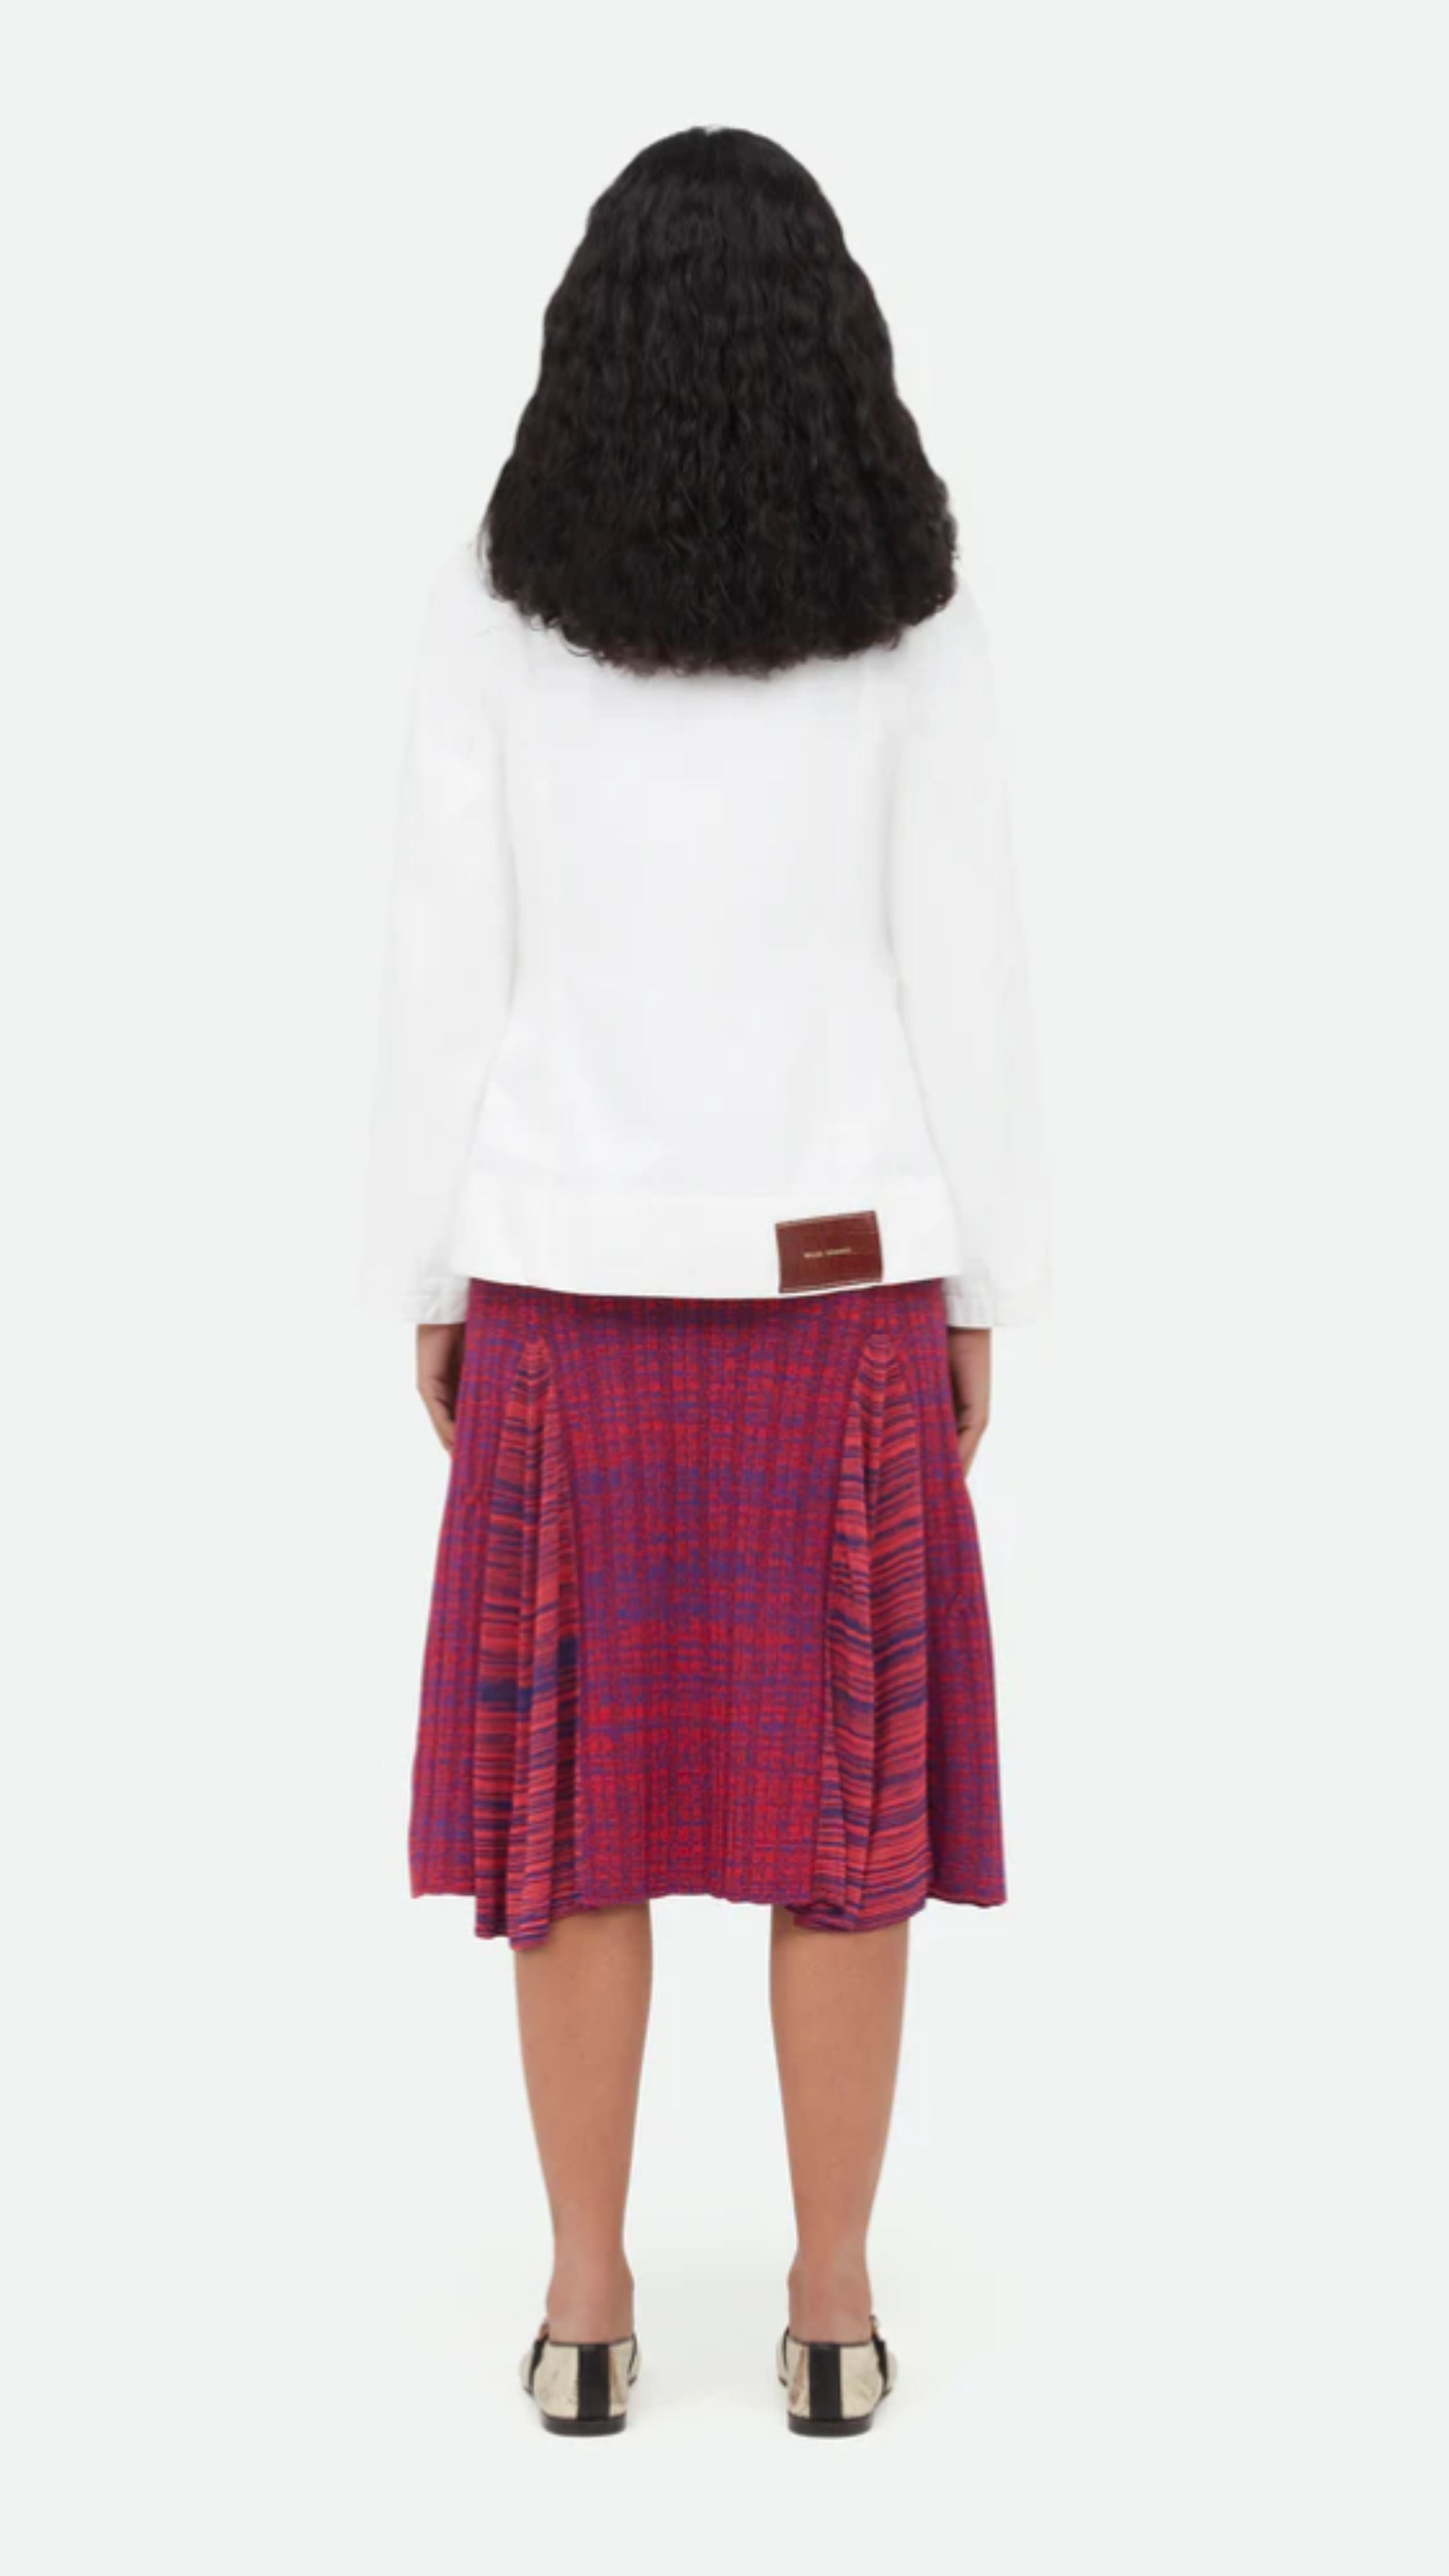 Wales Bonner Nile Skirt This A-line midi skirt features an elastic waist and beautiful pleats at the mid-thigh. Woven striped pattern in red and purples. The skirt falls to knee length. Shown on model facing back